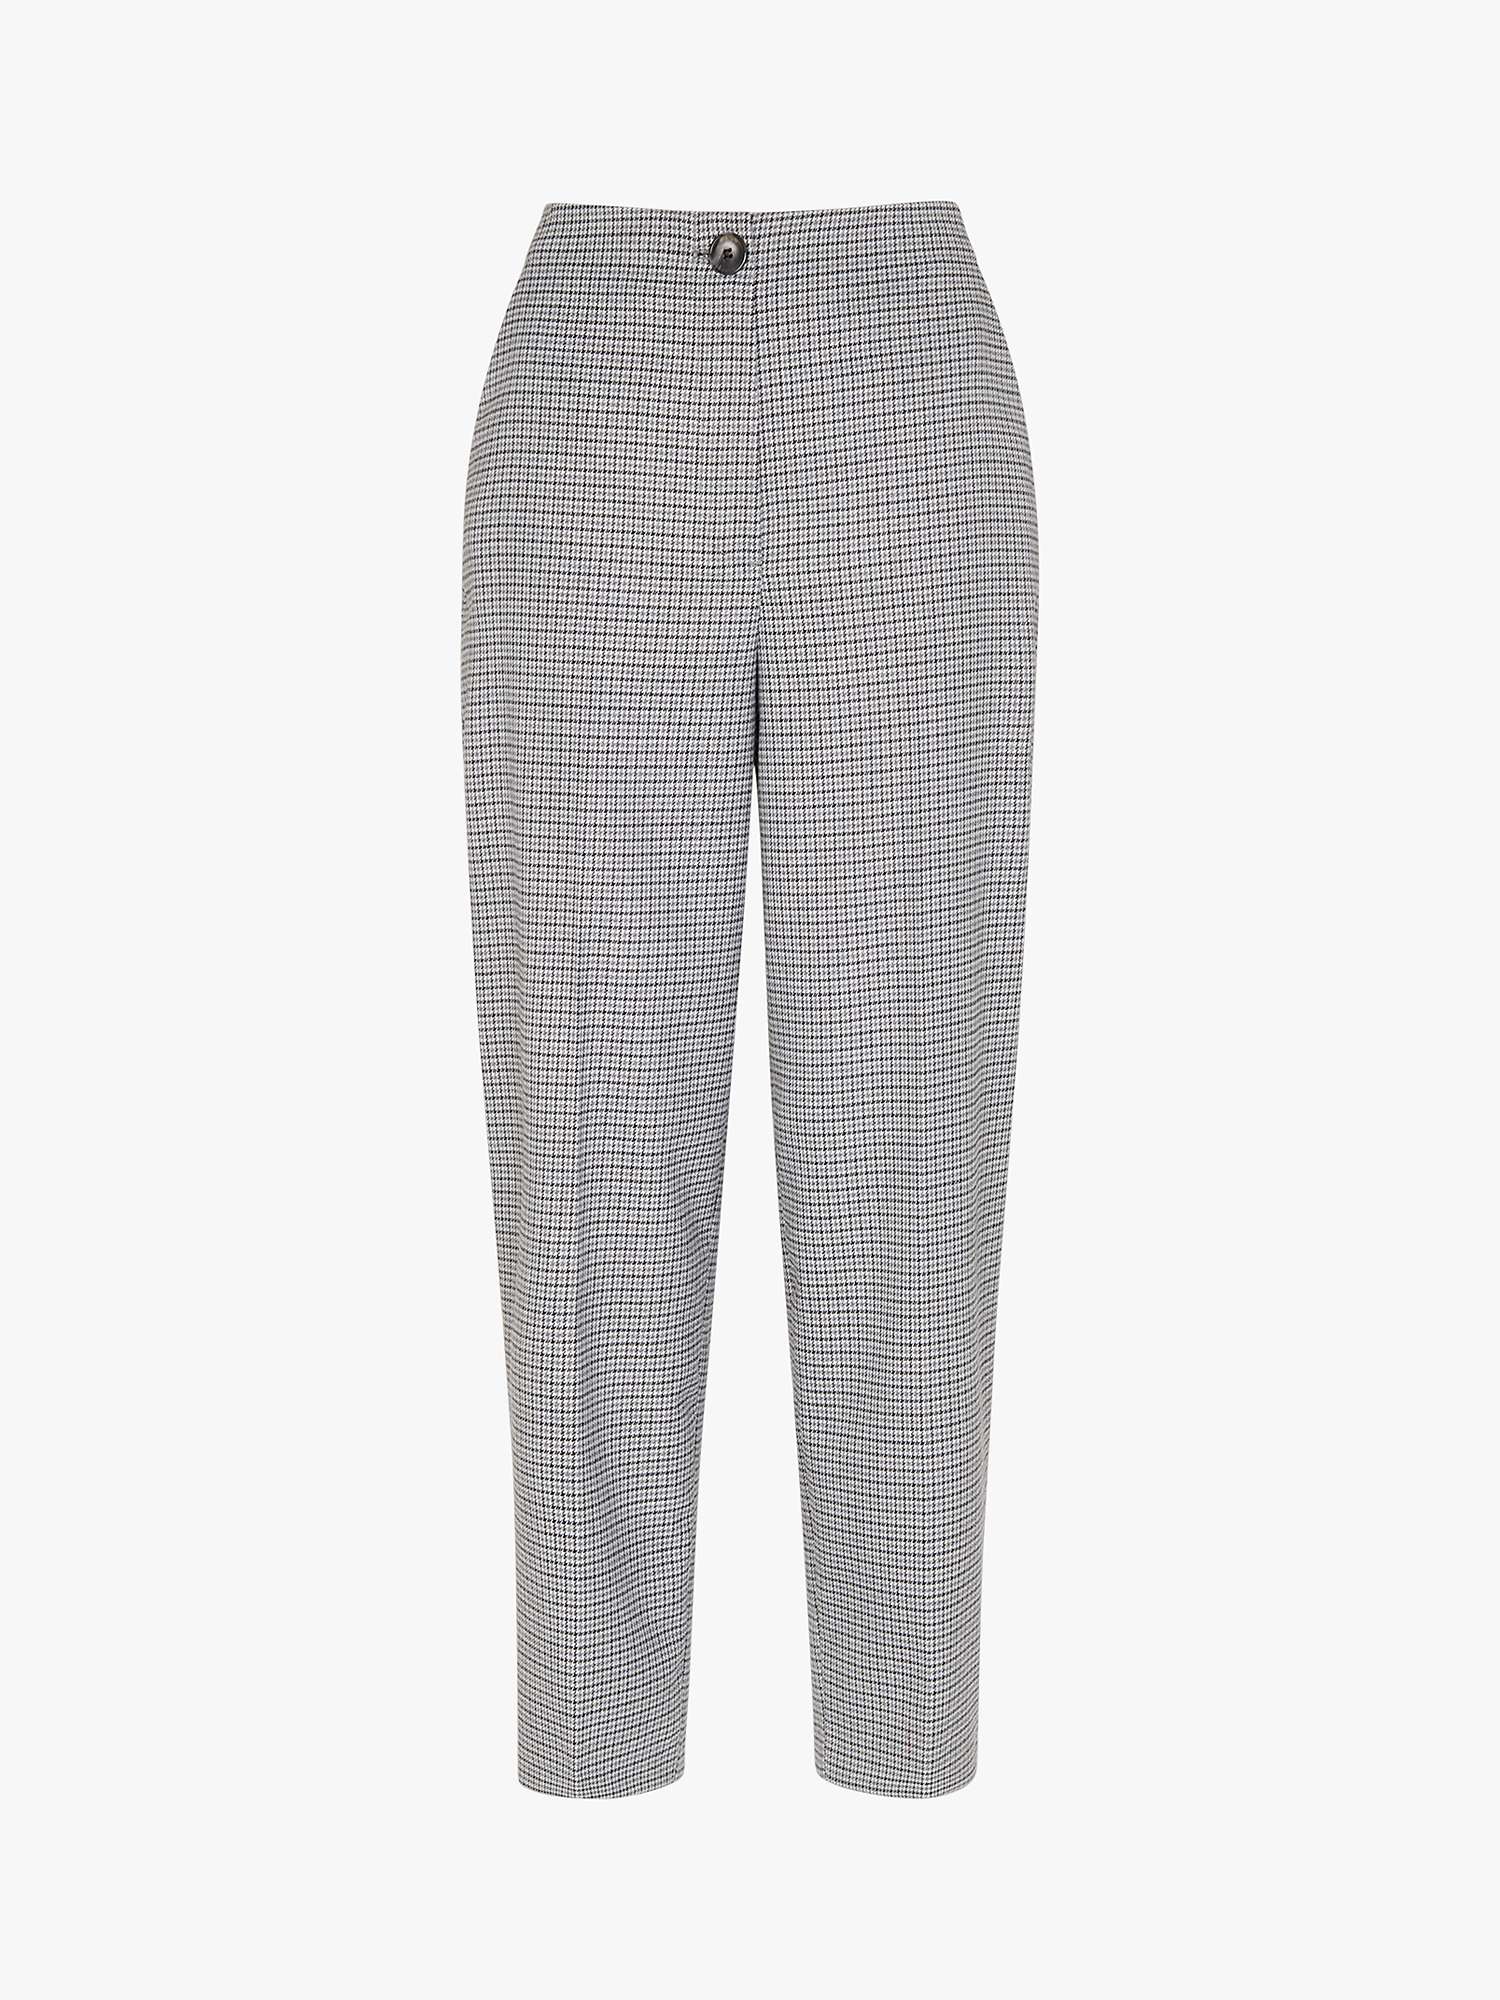 Buy Whistles Lila Check Trousers, Multi Online at johnlewis.com